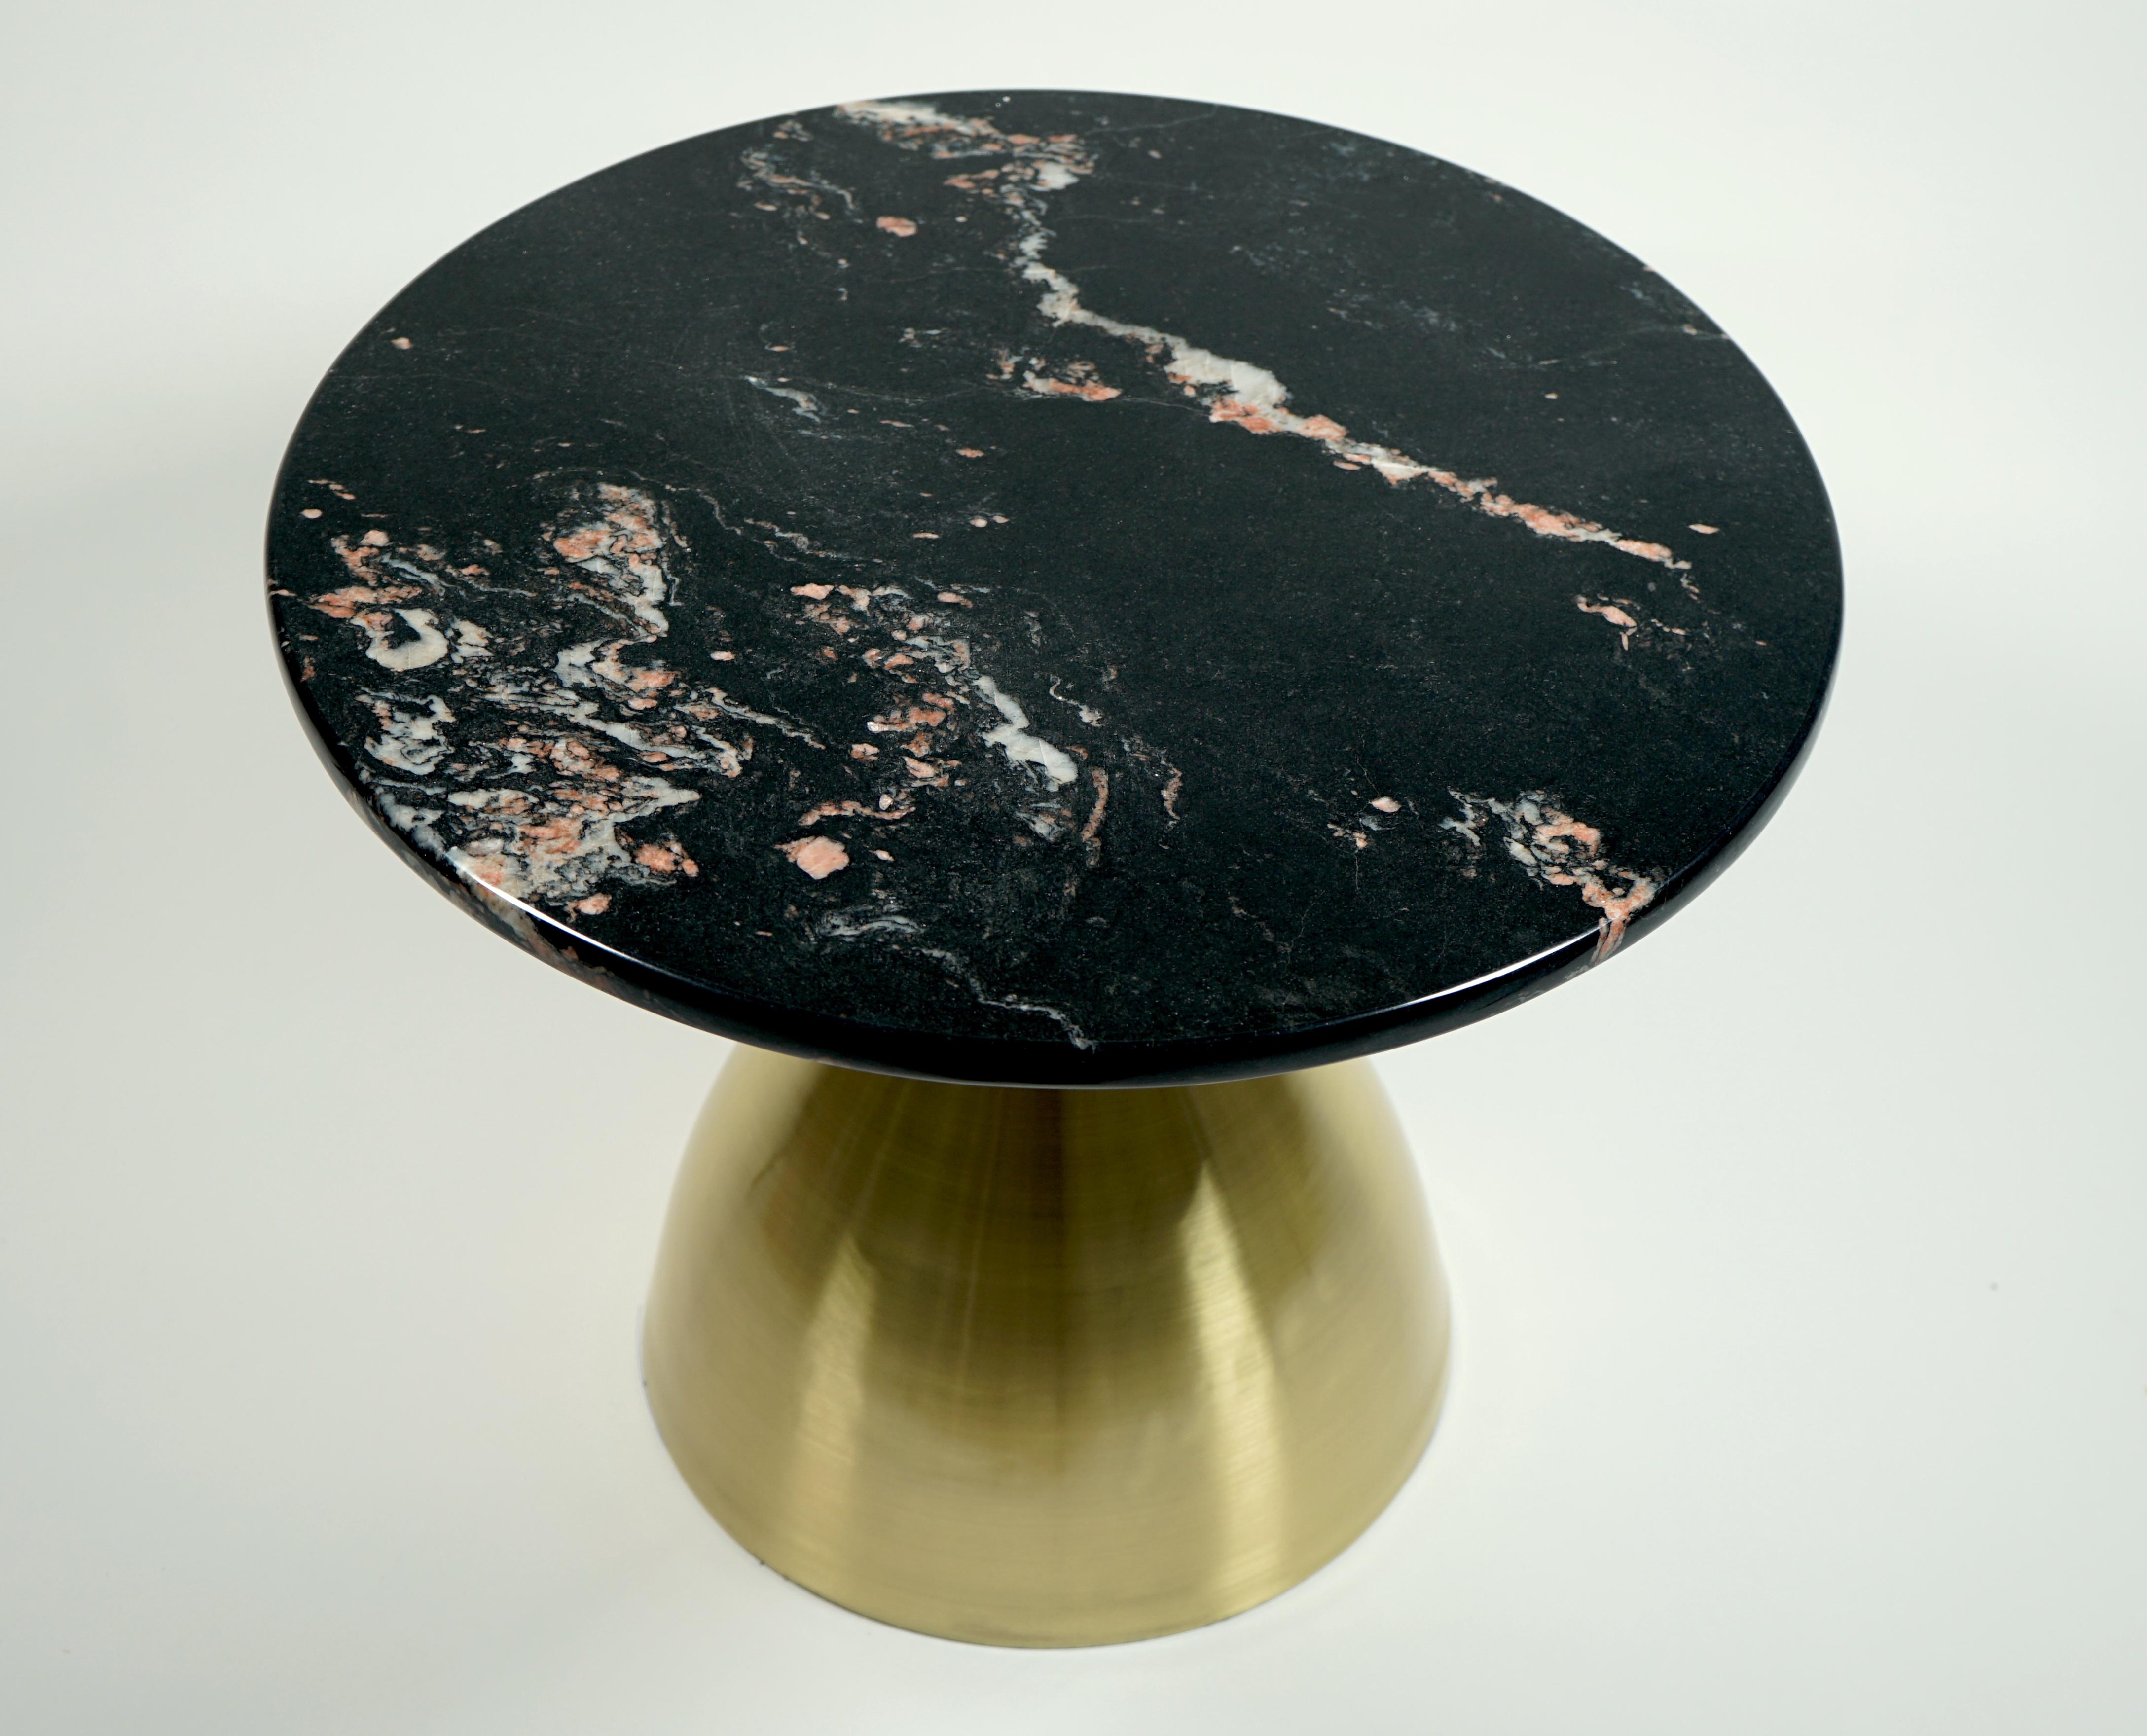 Coffee table model Mushroom designed by Studio Superego for Superego Editions. Low table handmade with satin brass leg and Portorose marble top.

Biography:
Superego editions was born in 2006, performing a constant activity of research in decorative